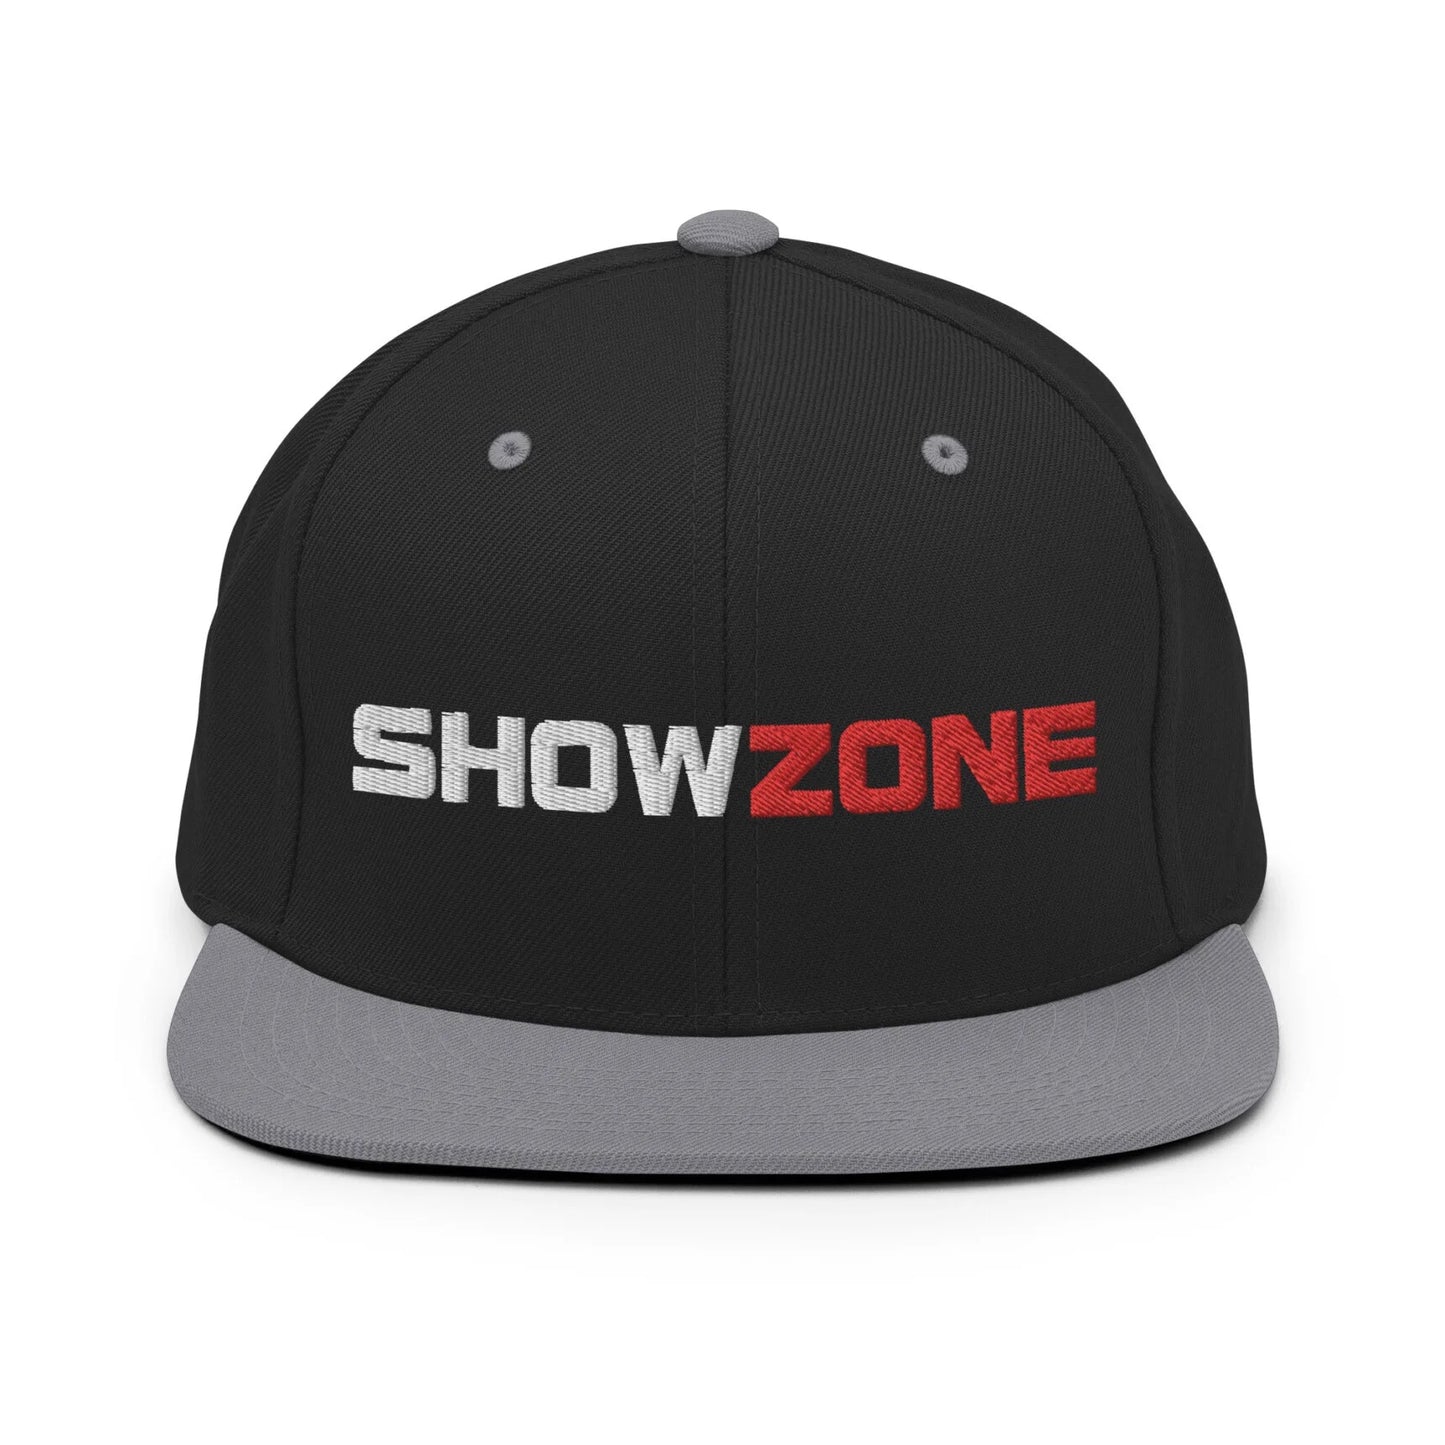 ShowZone snapback hat in black with text logo and grey brim accents